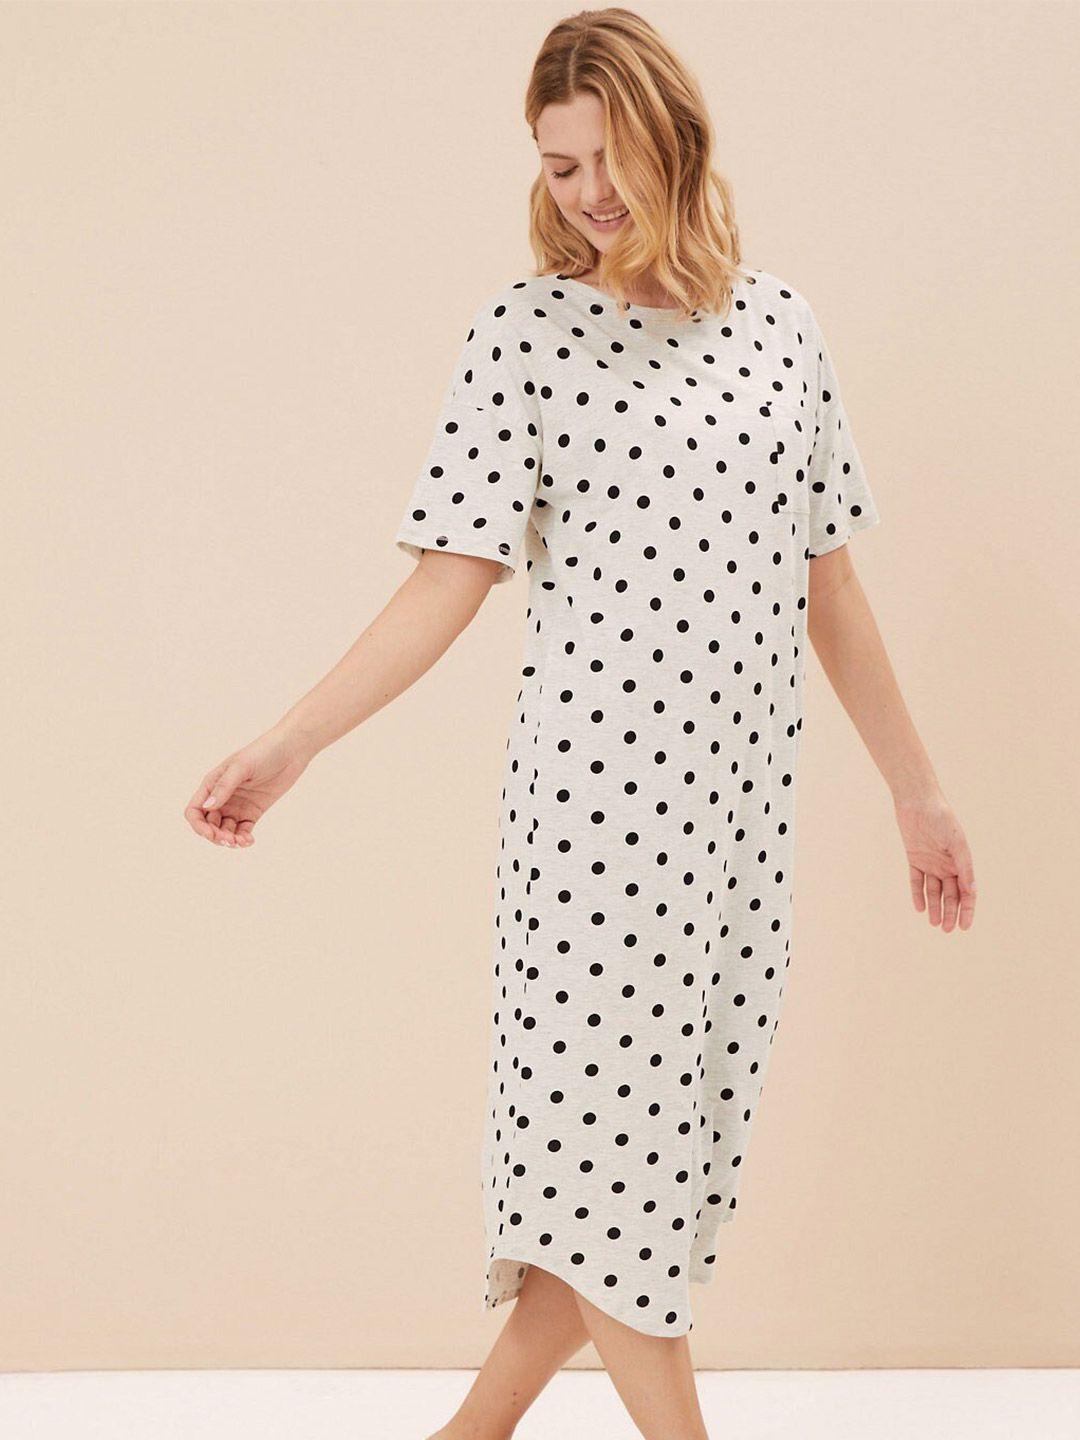 marks & spencer pack of 2 polka dots printed pure cotton t-shirt nightdress